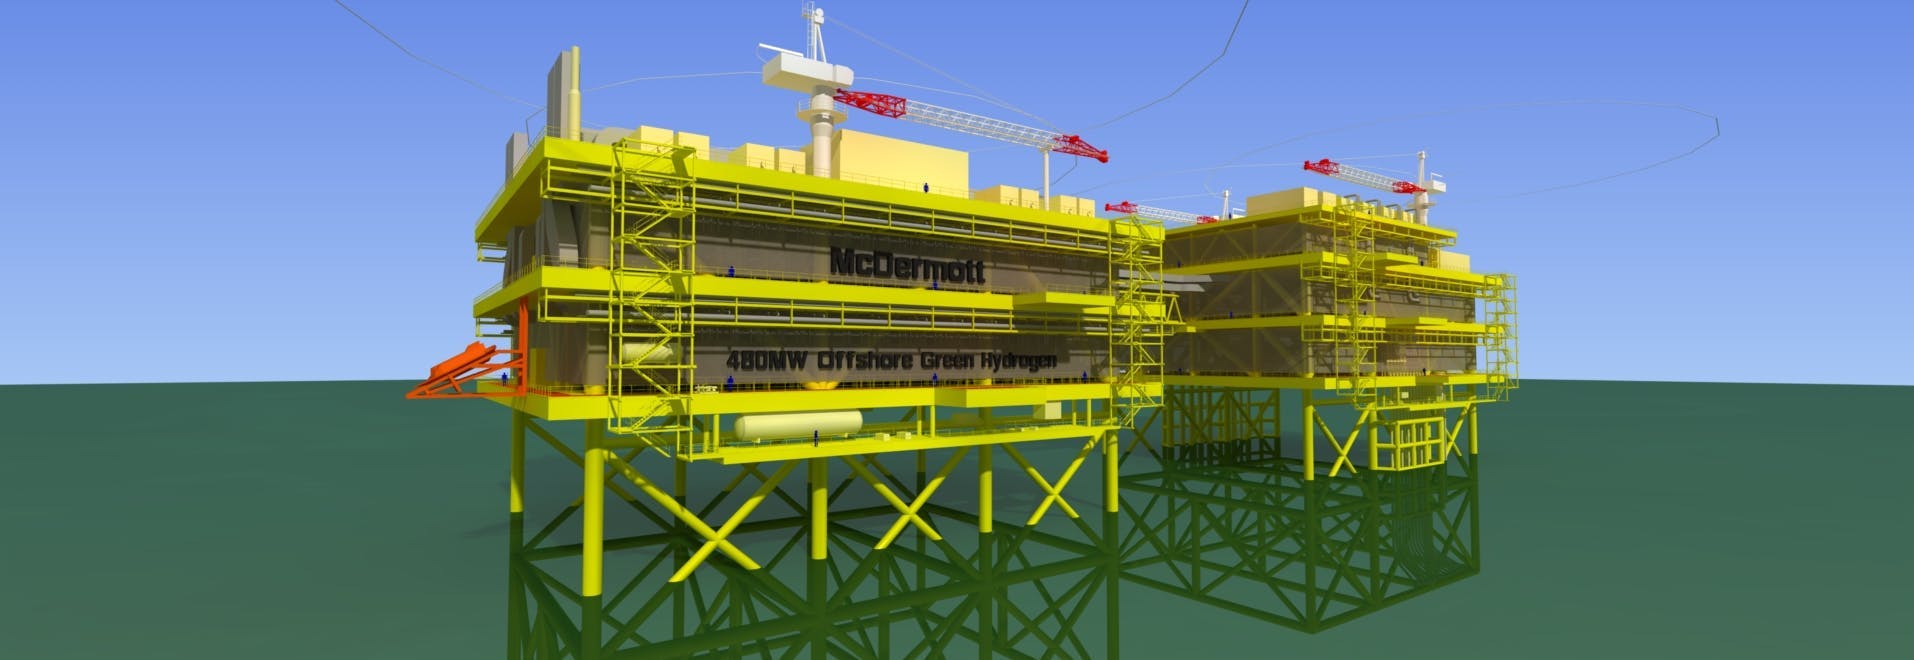 The platform structure is designed to accommodate the electrolyser facilities needed to produce 300 to 500 MW.